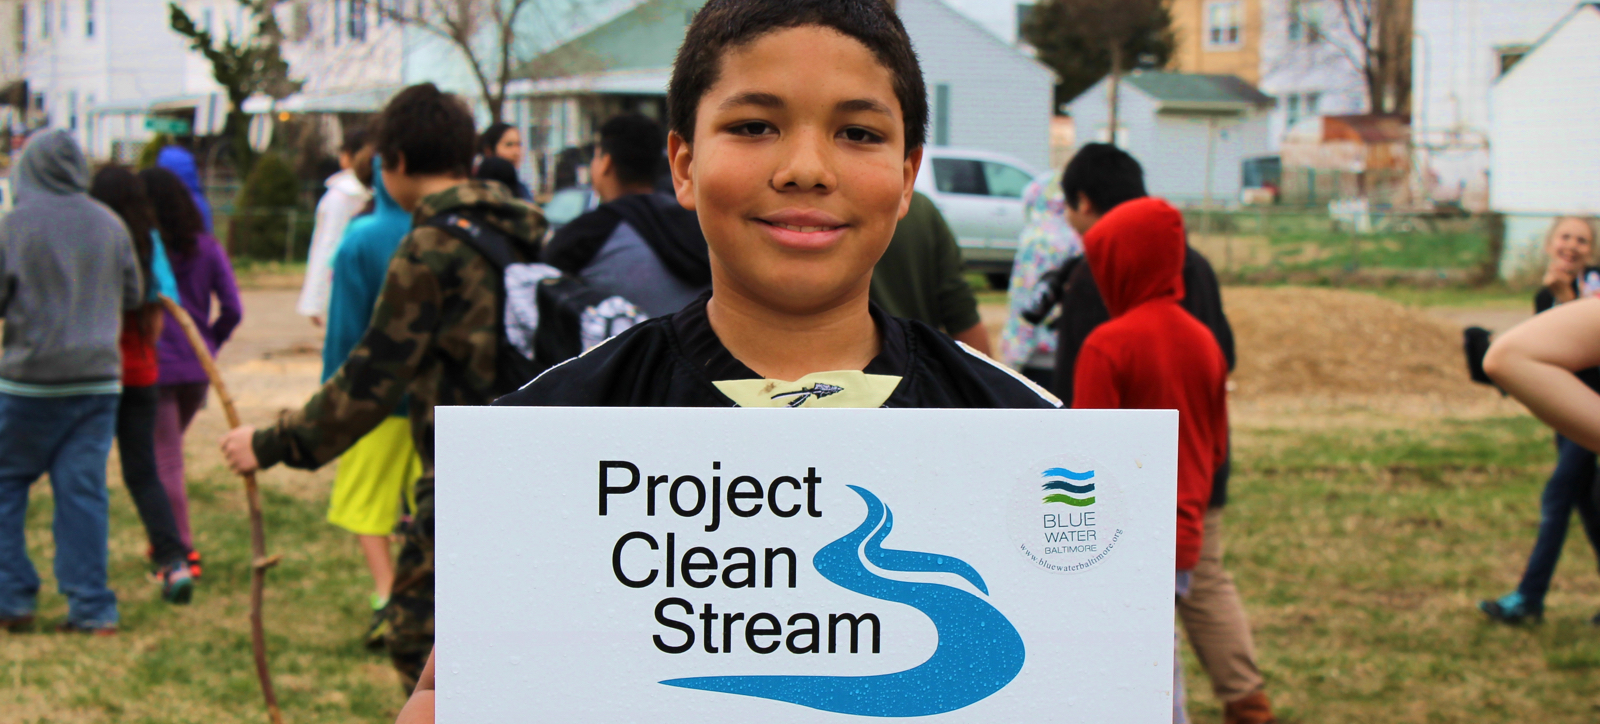 a young boy holding up a sign that says project clean stream